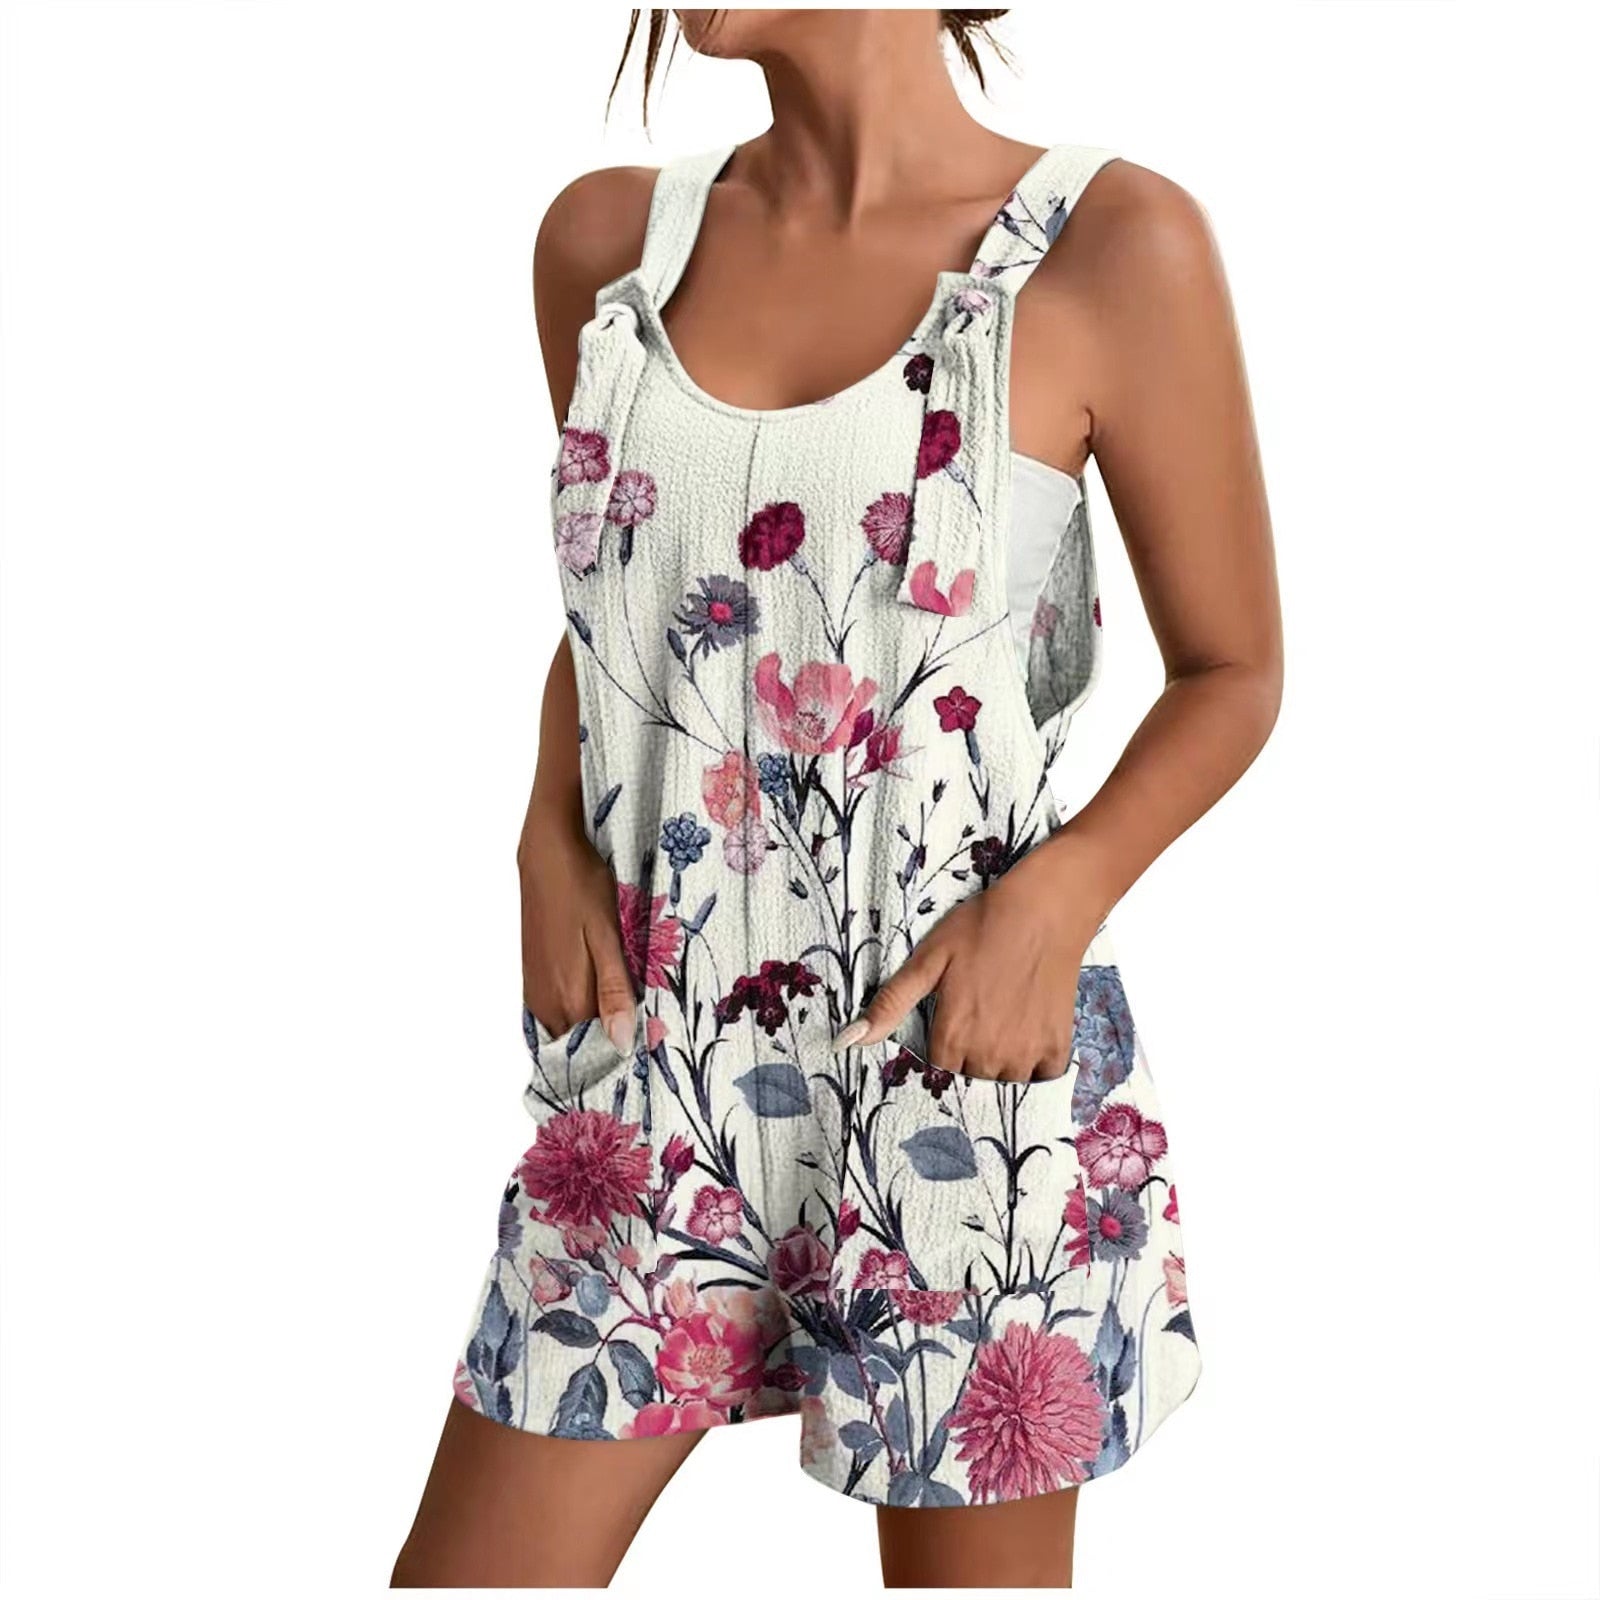 Rompers for Women Summer Wide Leg Jumpsuits Tie Knot Strap Shorts Romper Comfy Casual Overalls with Pockets